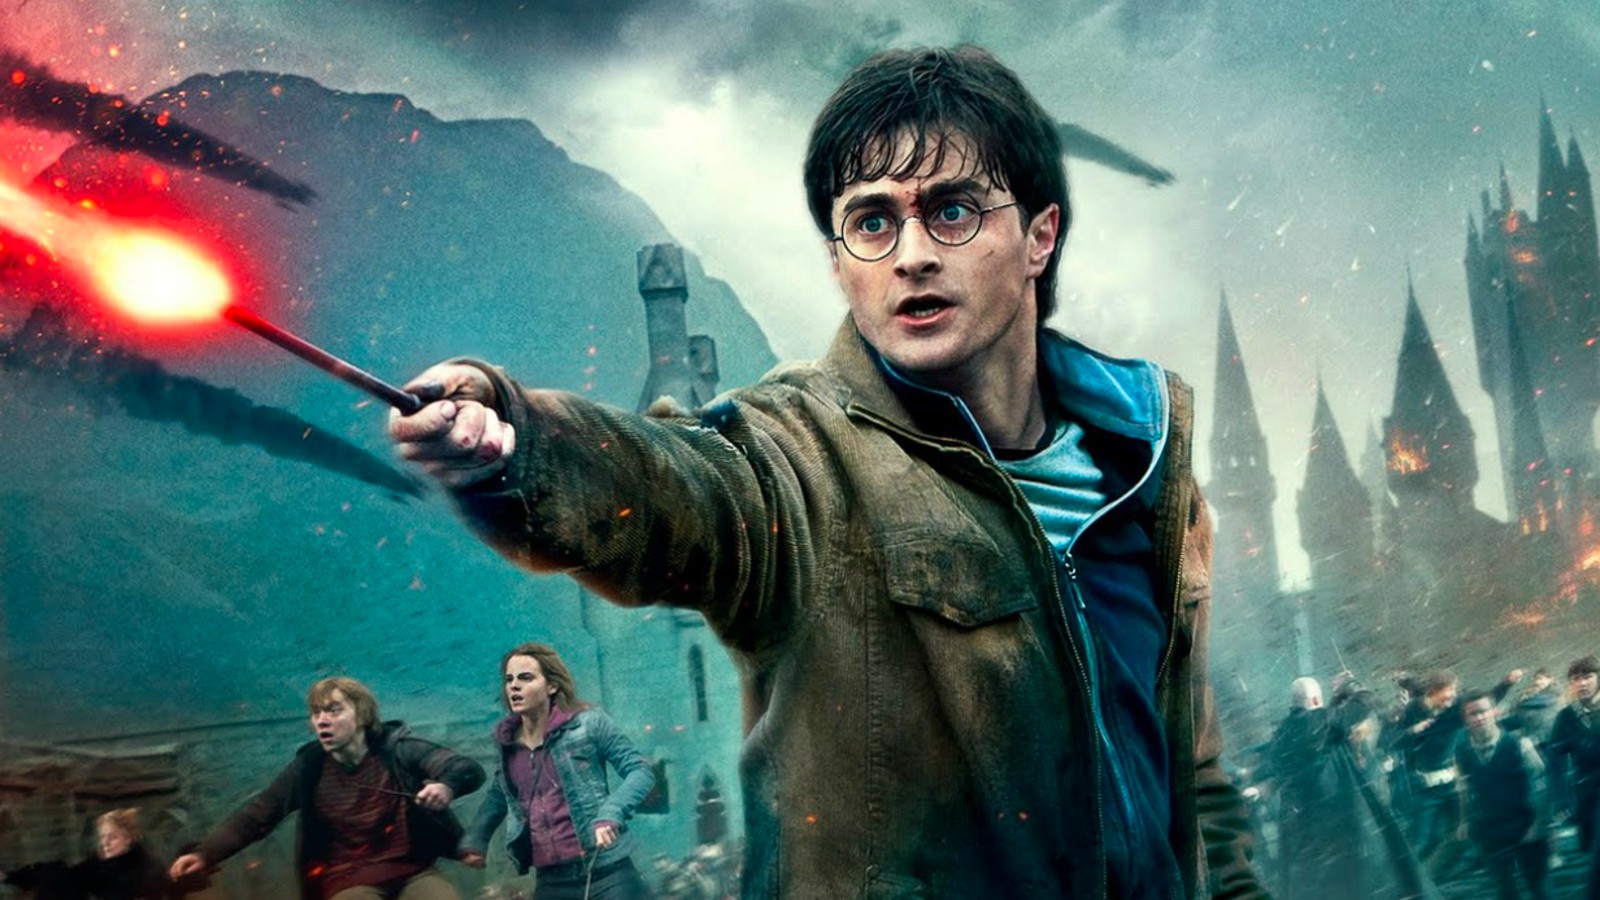 Daniel Radcliffe Unlikely to Cameo in Upcoming Harry Potter TV Show